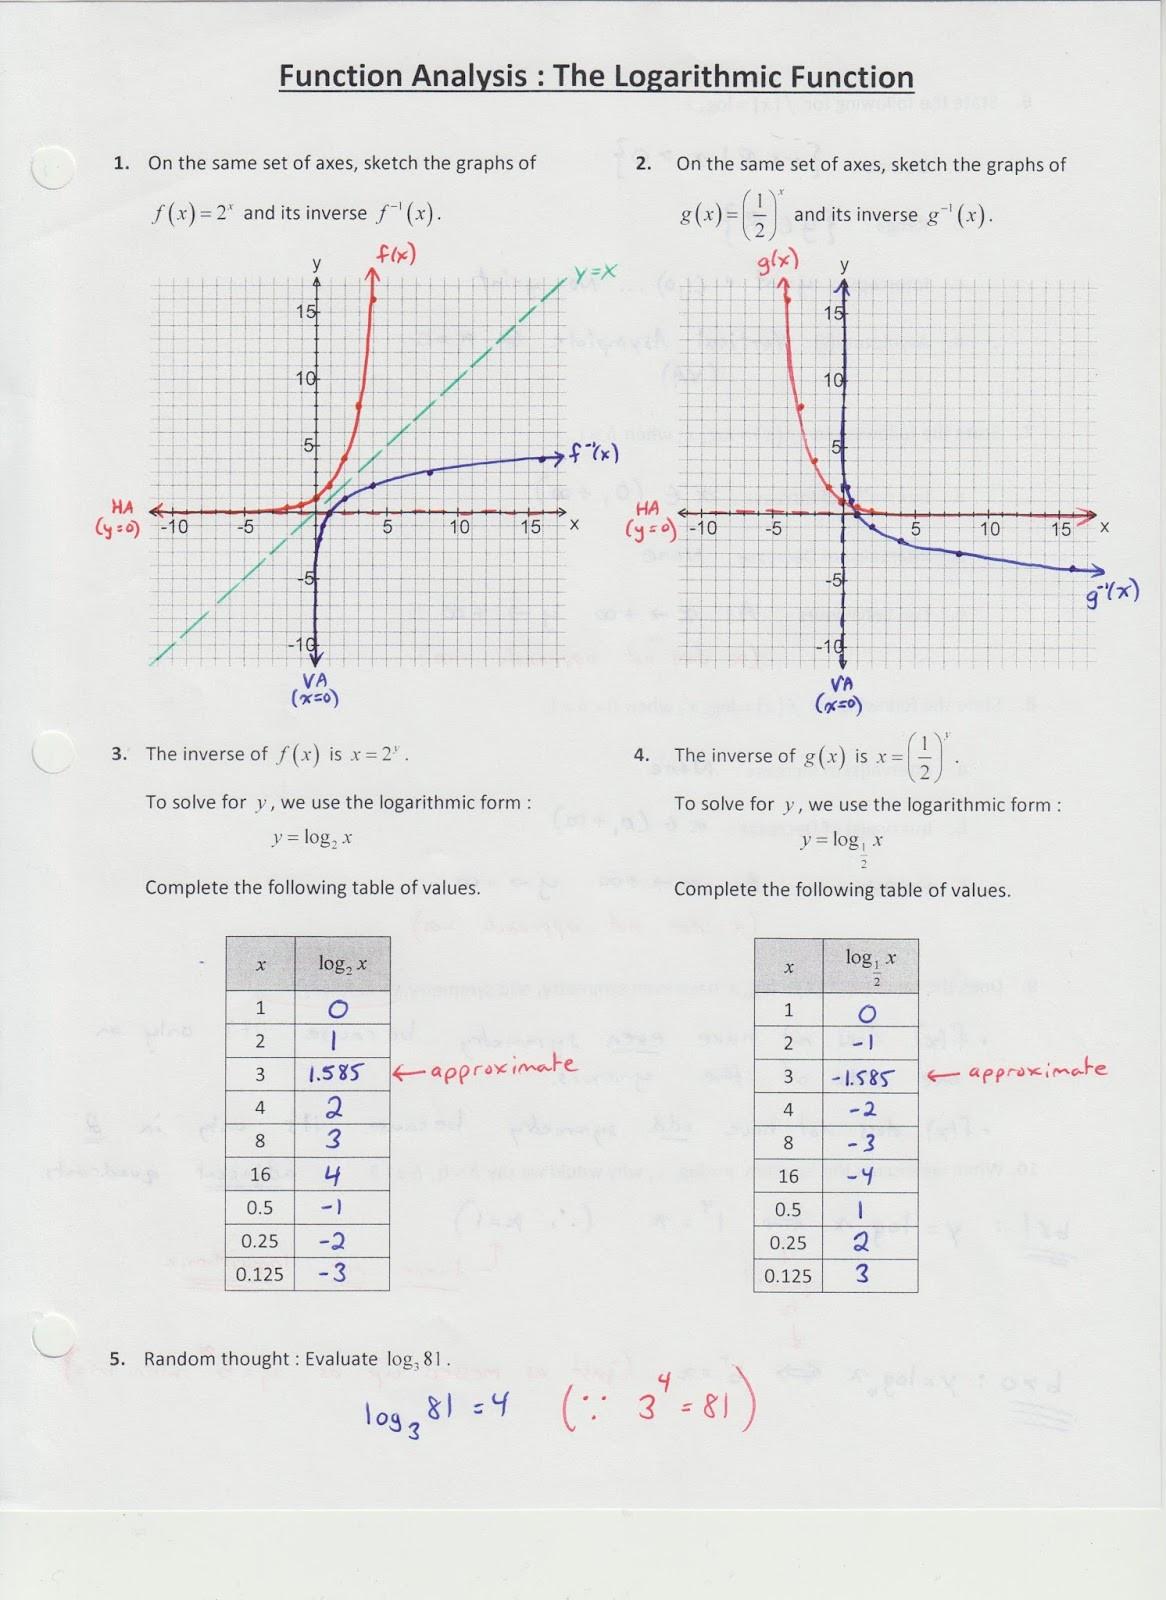 Graphing Exponential Functions Worksheet Answers Graph Exponential Function Worksheet